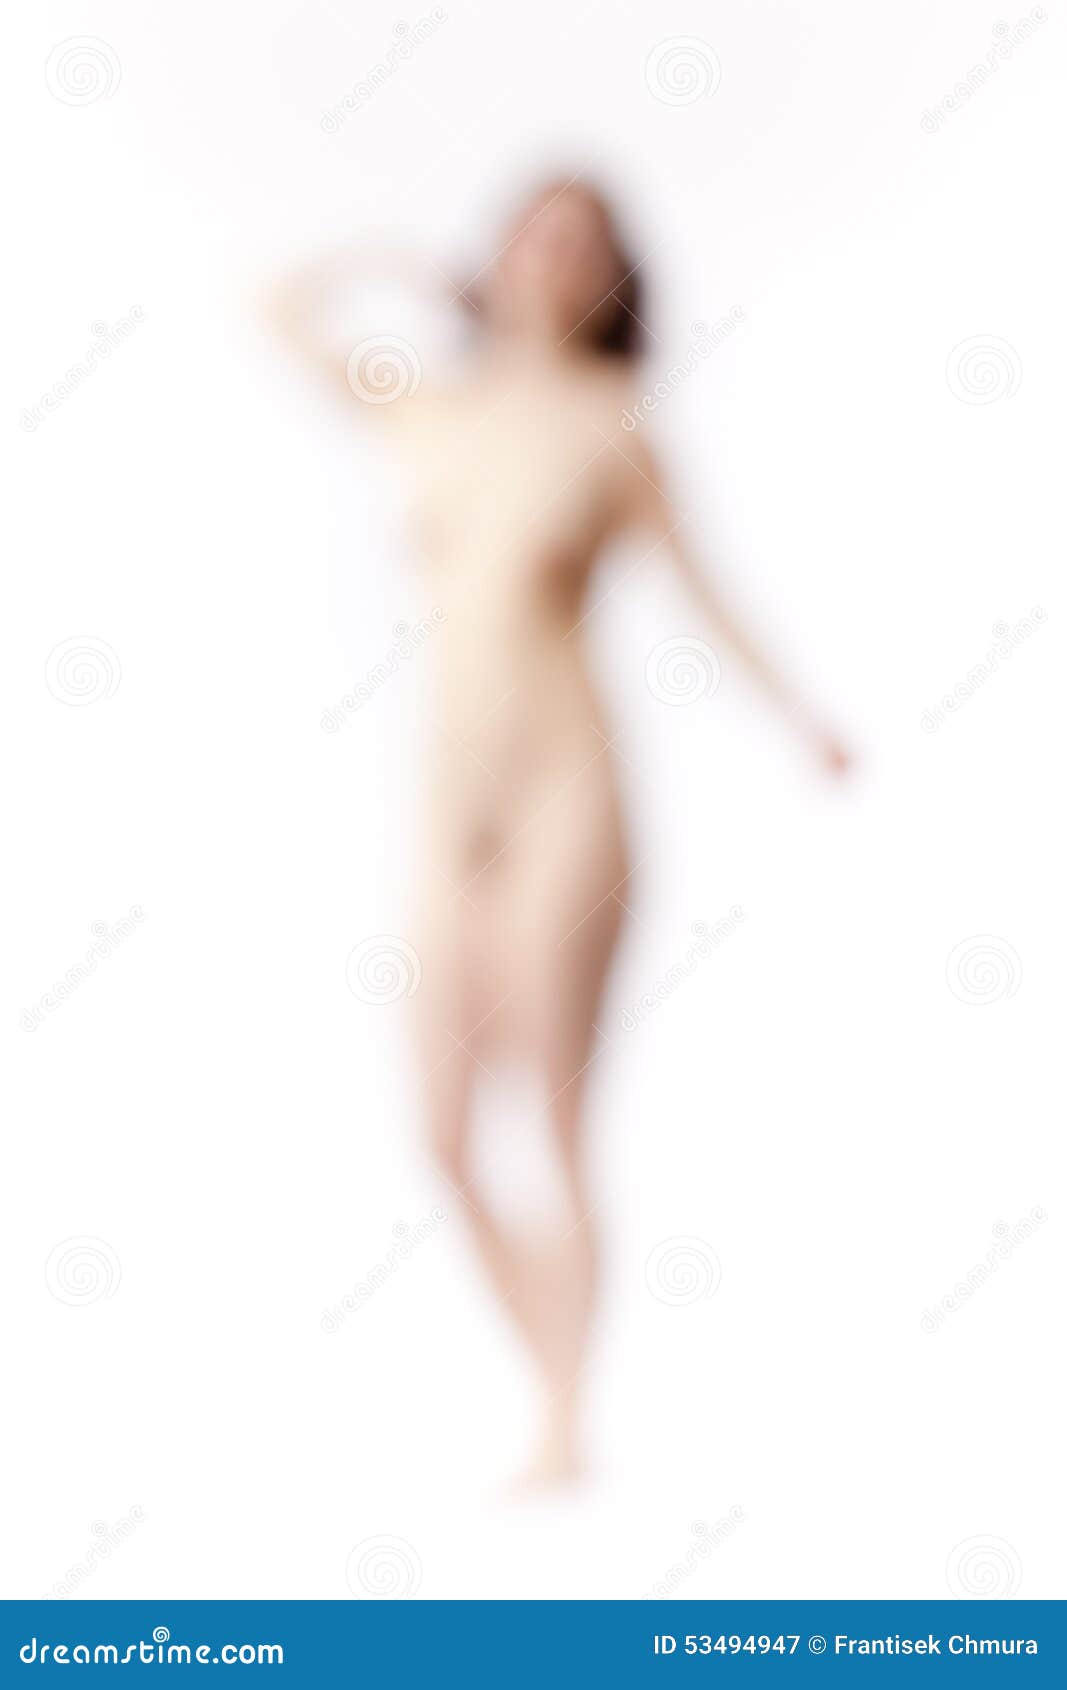 Out Of Focus Image Of A Nude Woman Stock Image - Image of blurred, abstract...